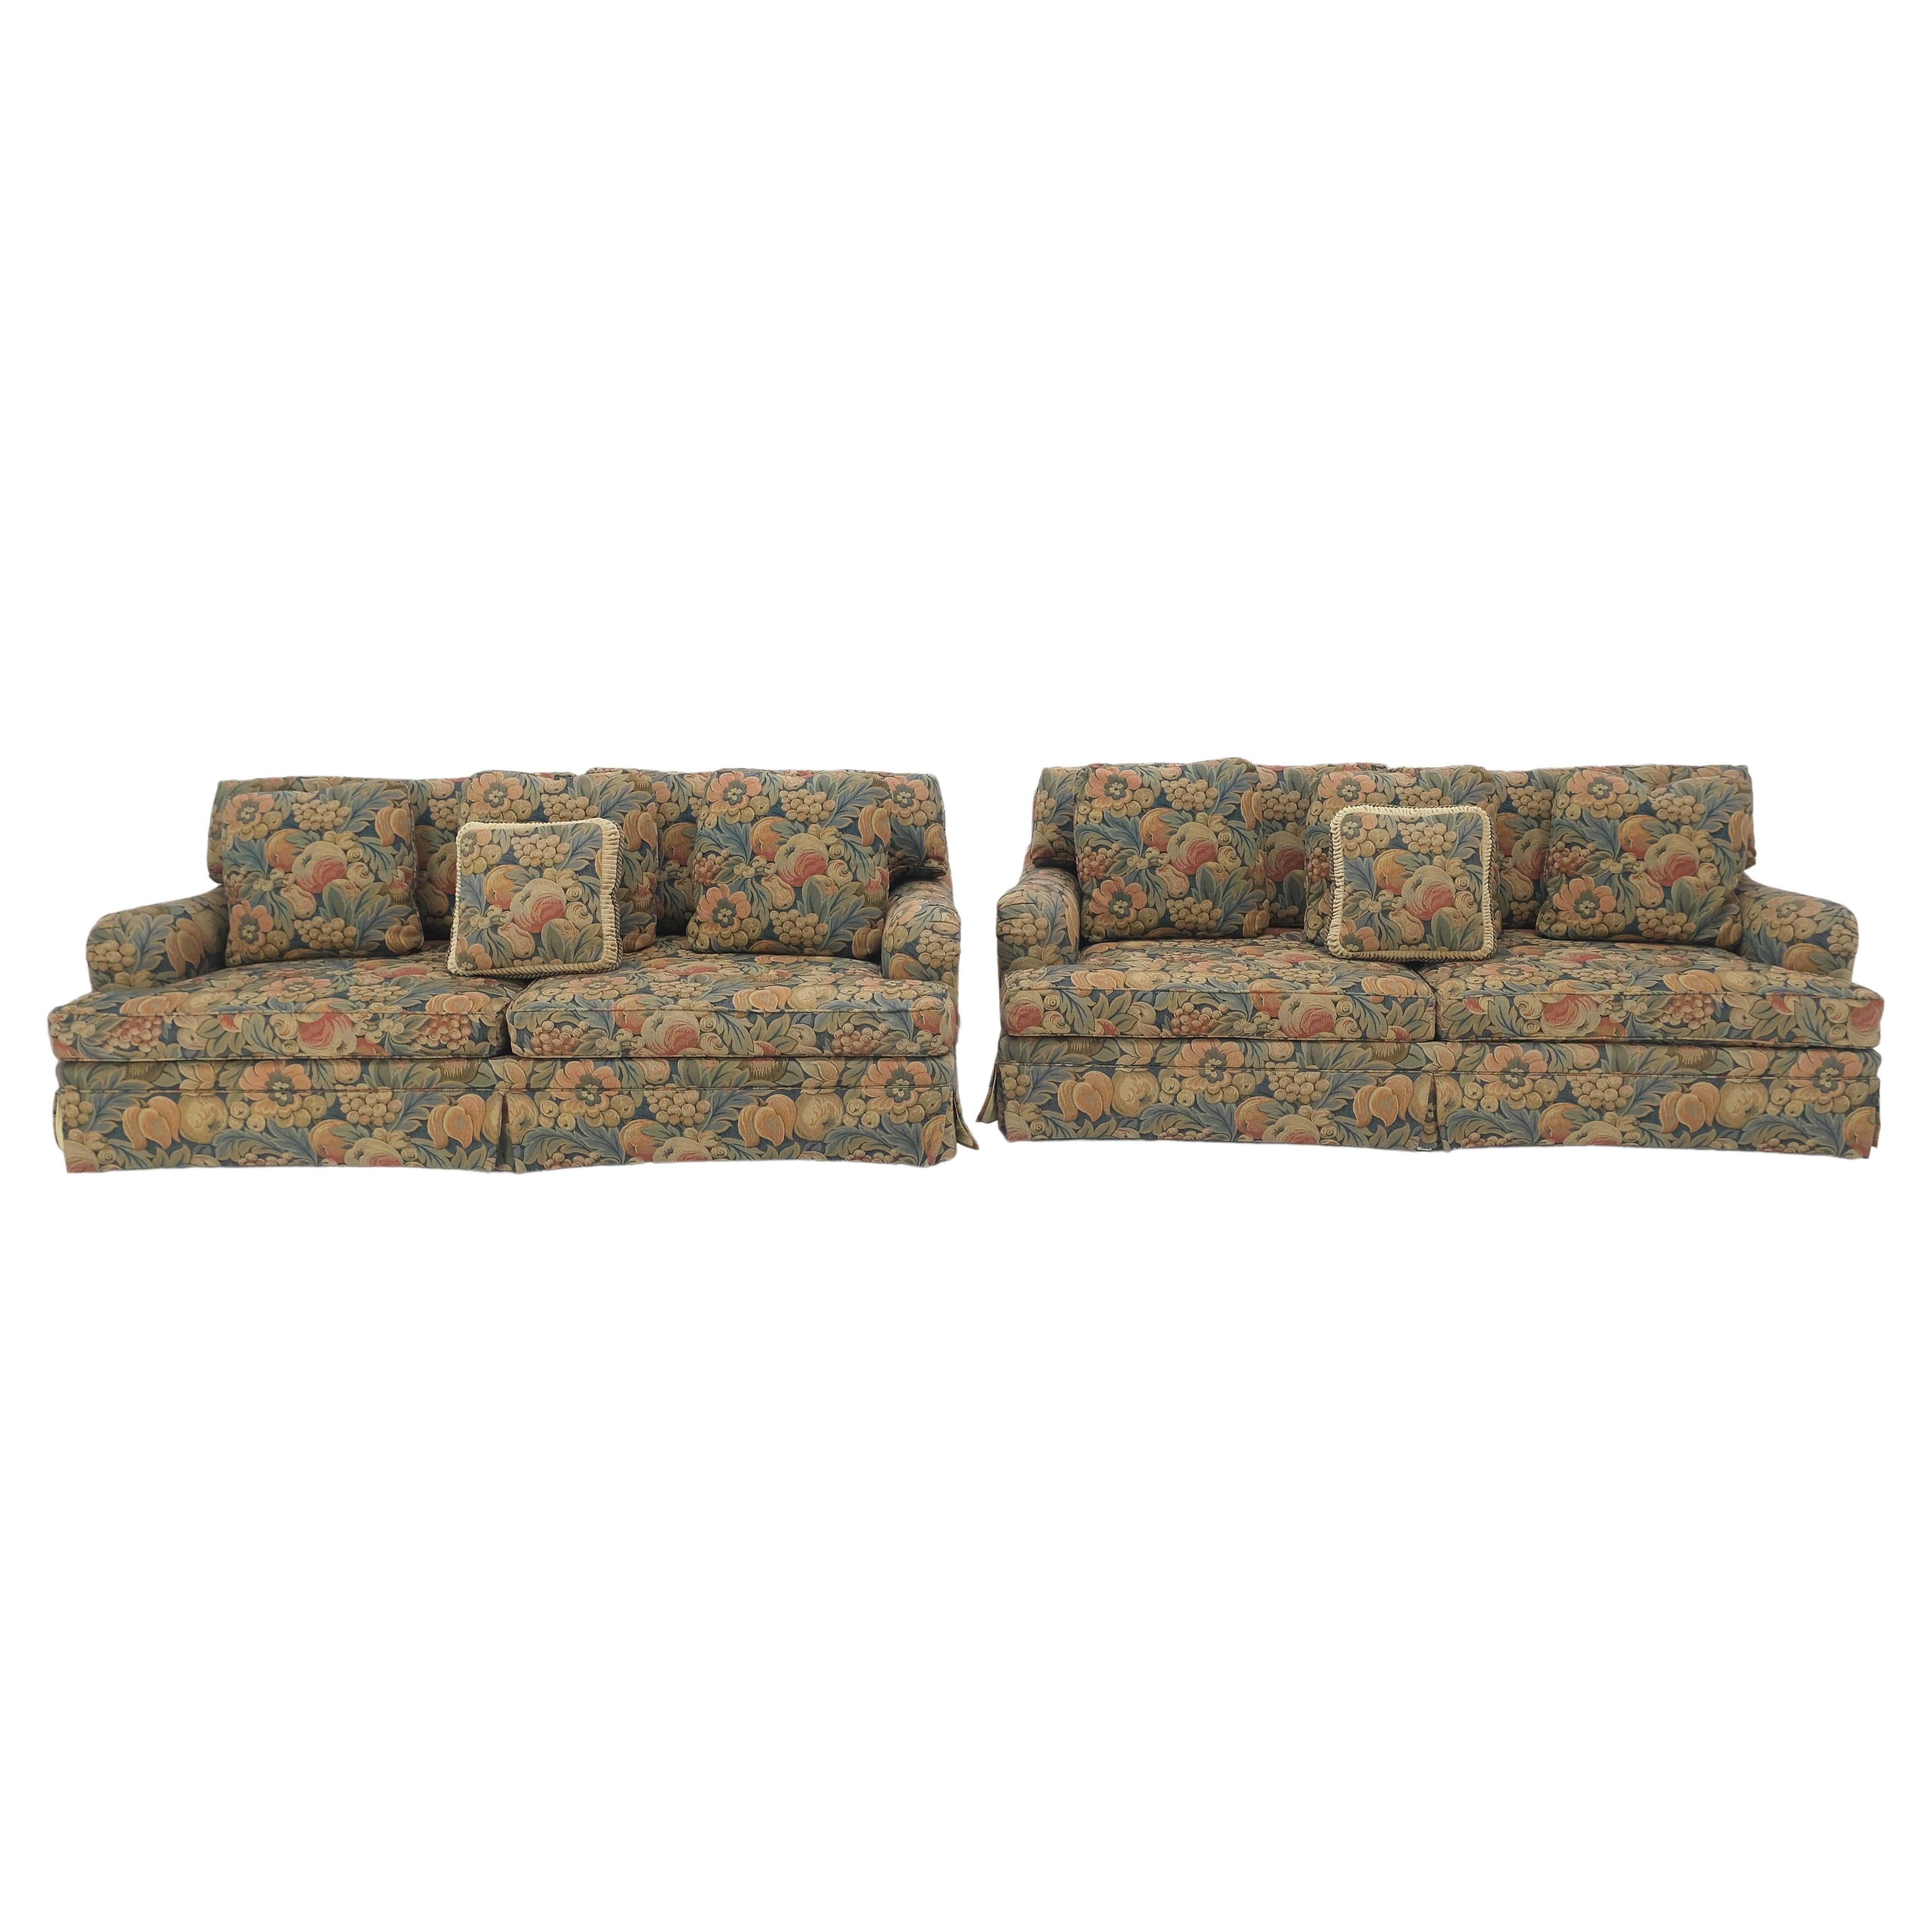 American Baker Matching Pair of Two Floral Pattern Three Seater Traditional Sofas MINT!